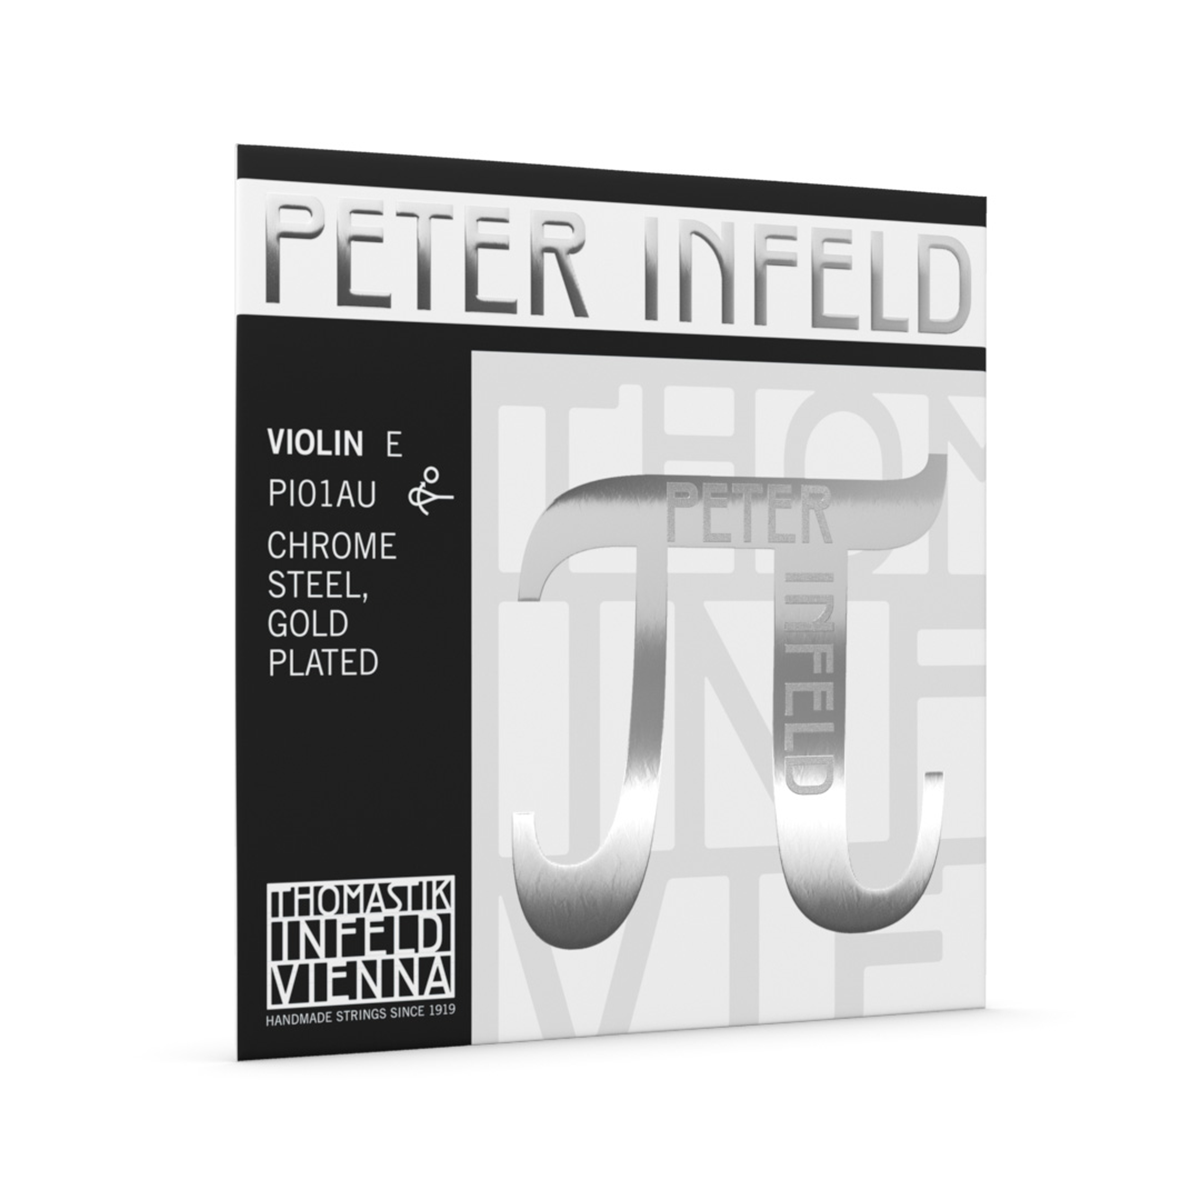 Violin String E Peter Infeld Chrome Steel, Gold Plated Ball/Loop